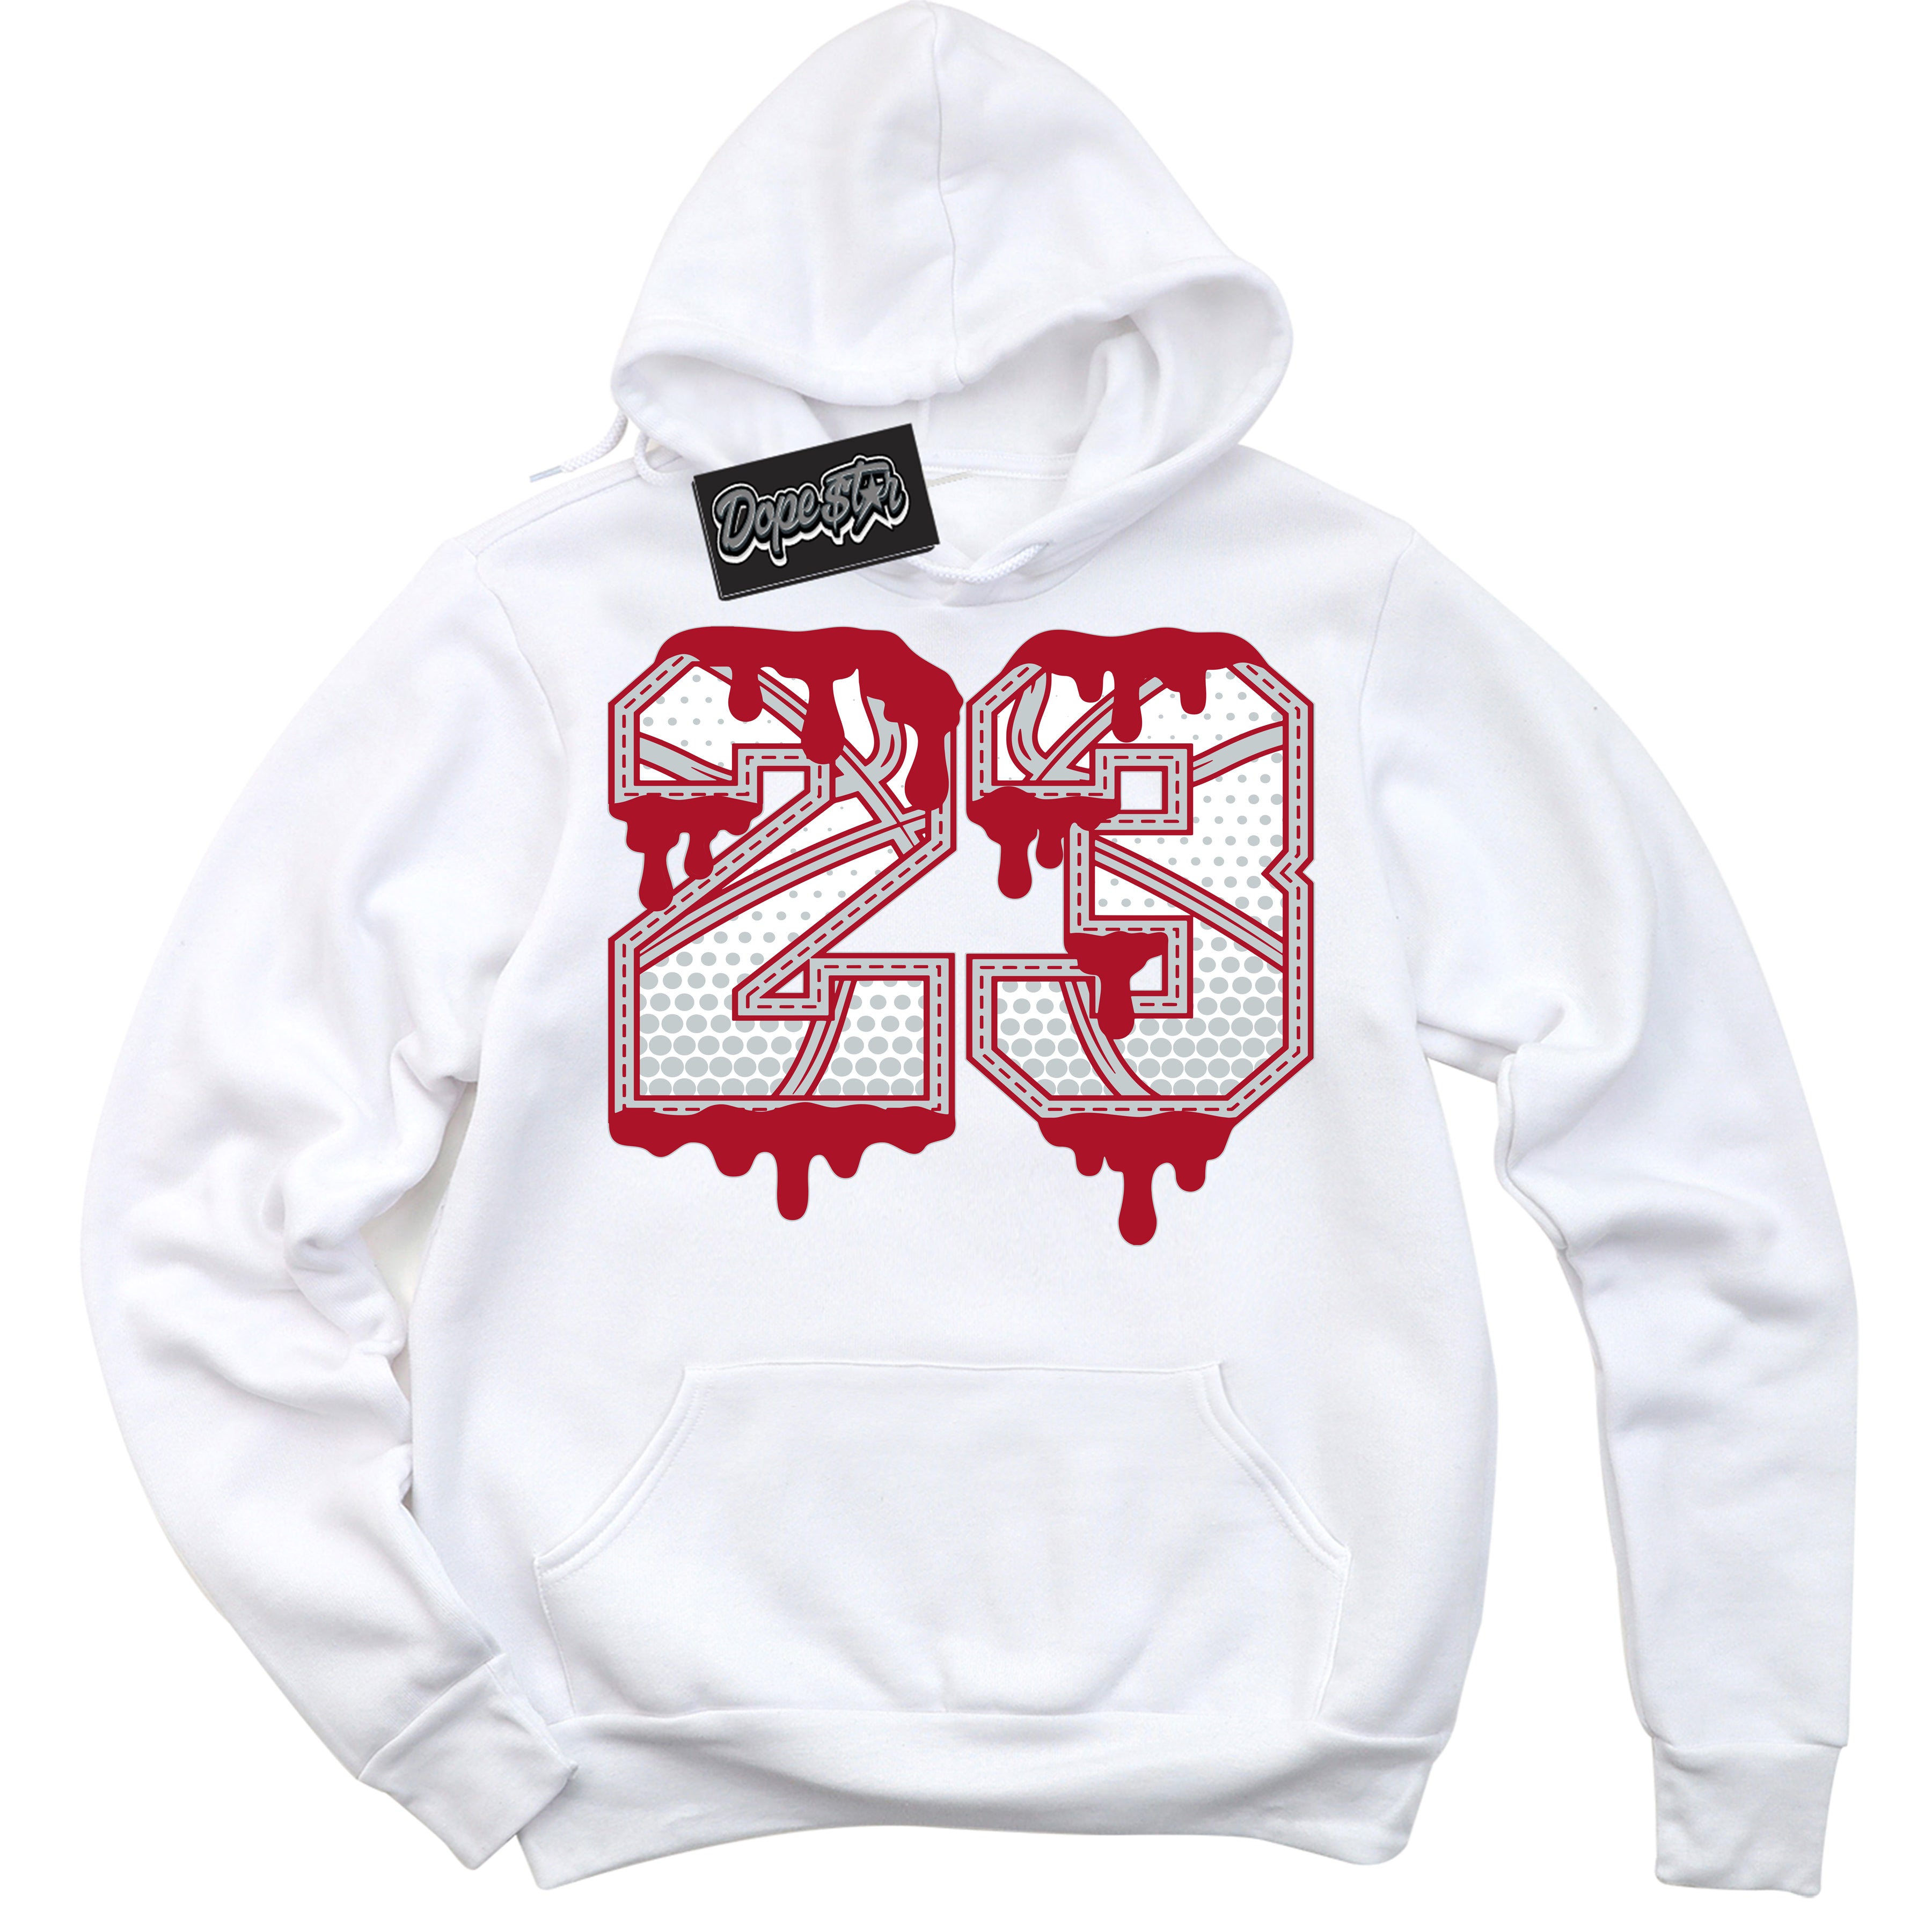 Cool White Hoodie with “ 23 Ball ”  design that Perfectly Matches Reverse Ultraman Sneakers.